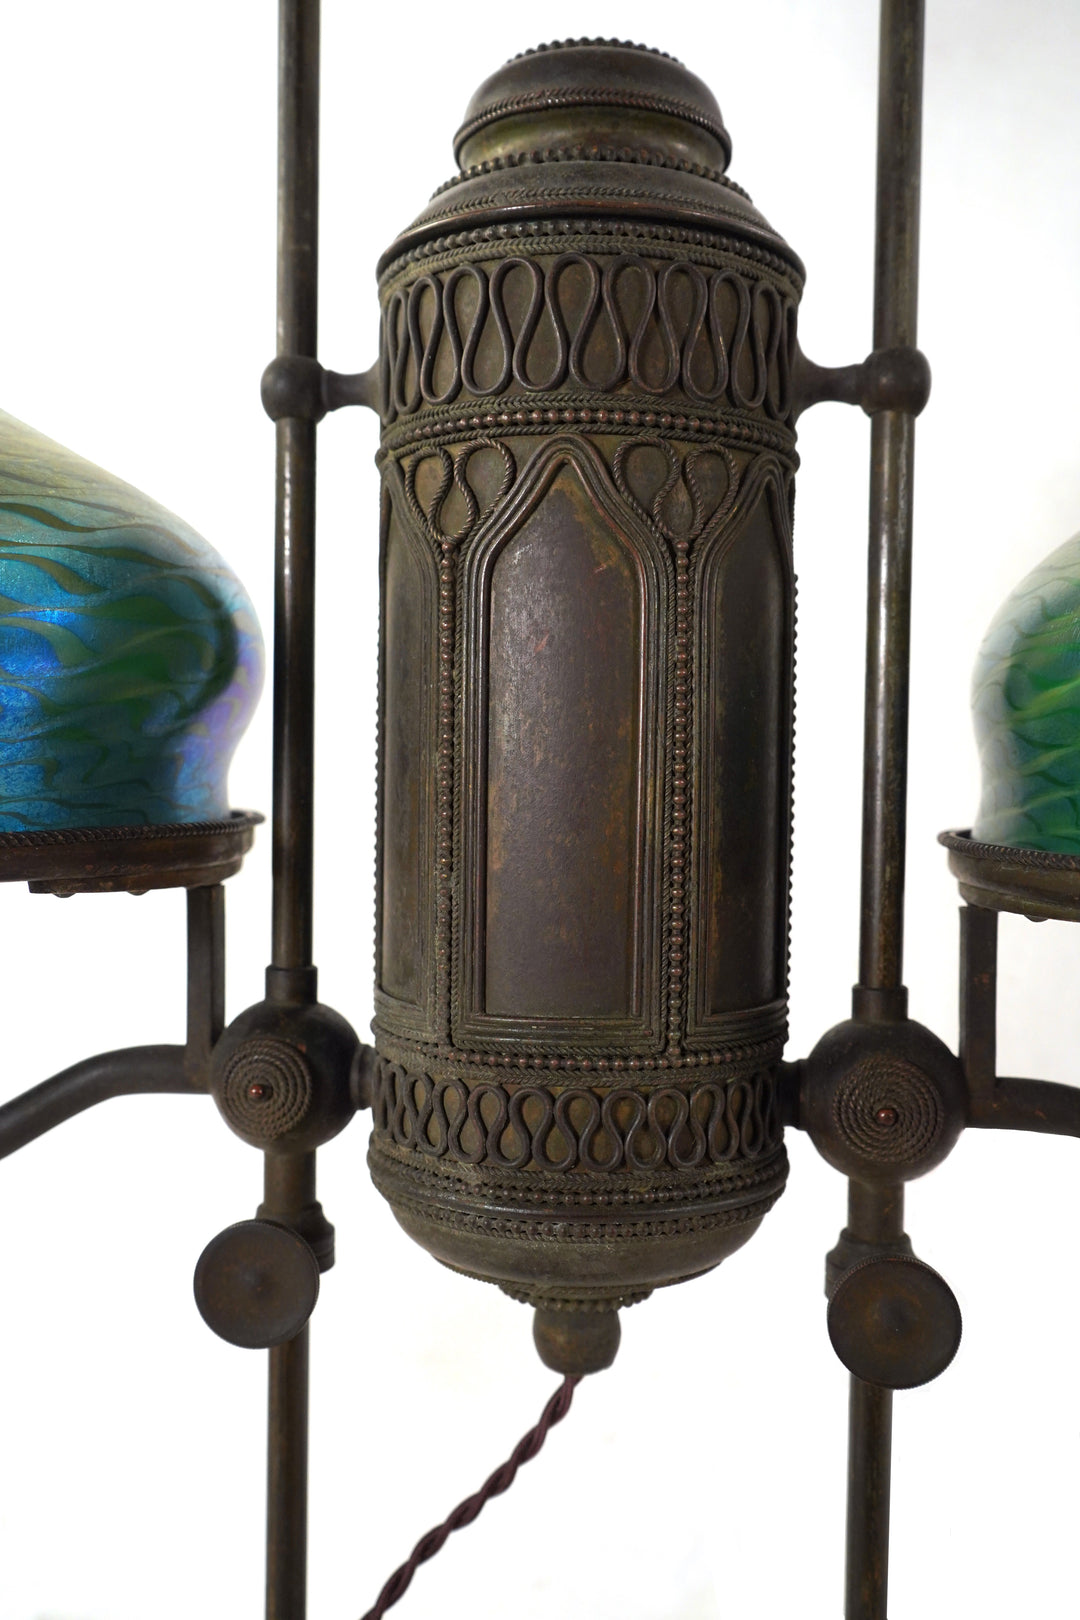 Tiffany Studios Lamp Base with Favrille Shades